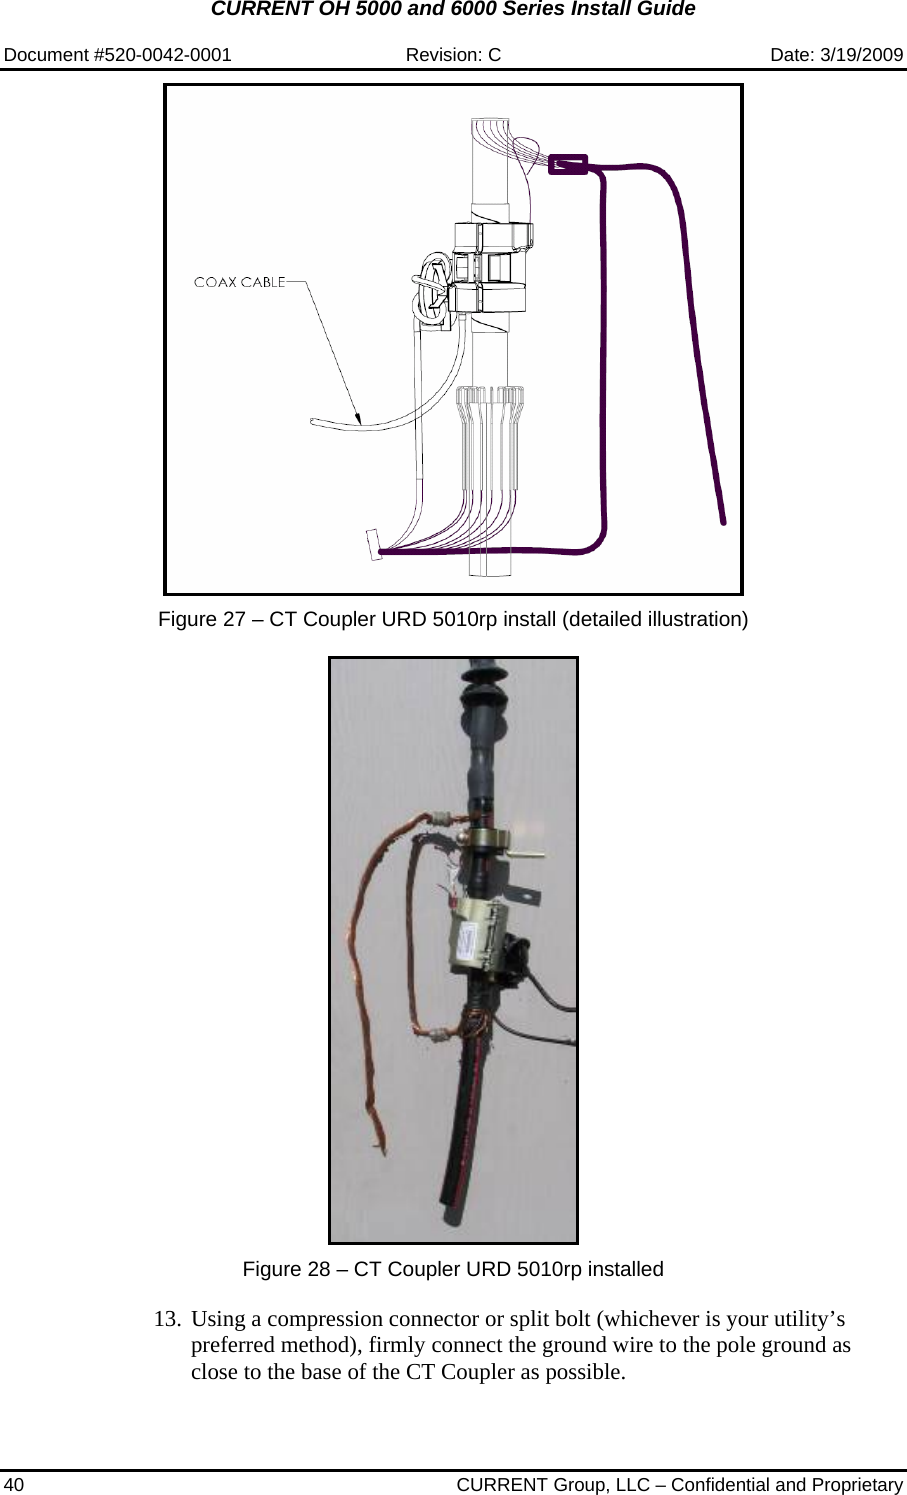 CURRENT OH 5000 and 6000 Series Install Guide  Document #520-0042-0001  Revision: C  Date: 3/19/2009 40  CURRENT Group, LLC – Confidential and Proprietary    Figure 27 – CT Coupler URD 5010rp install (detailed illustration)     Figure 28 – CT Coupler URD 5010rp installed   13. Using a compression connector or split bolt (whichever is your utility’s preferred method), firmly connect the ground wire to the pole ground as close to the base of the CT Coupler as possible.    